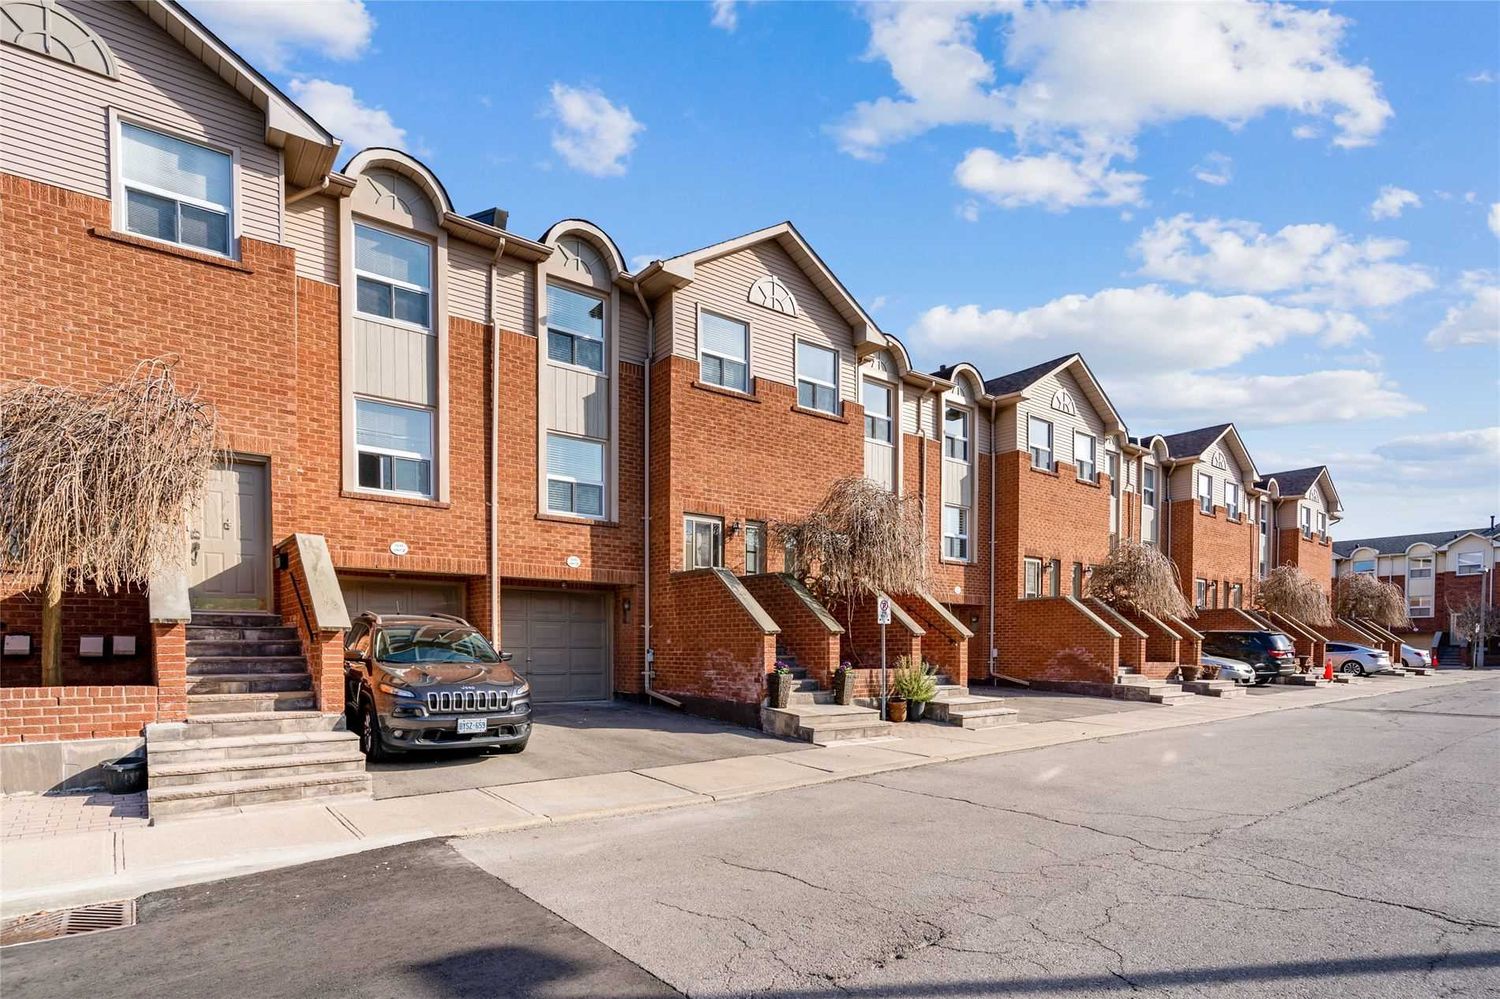 1500-1580 Reeves Gate. 1500 Reeves Gate Townhomes is located in  Oakville, Toronto - image #1 of 2